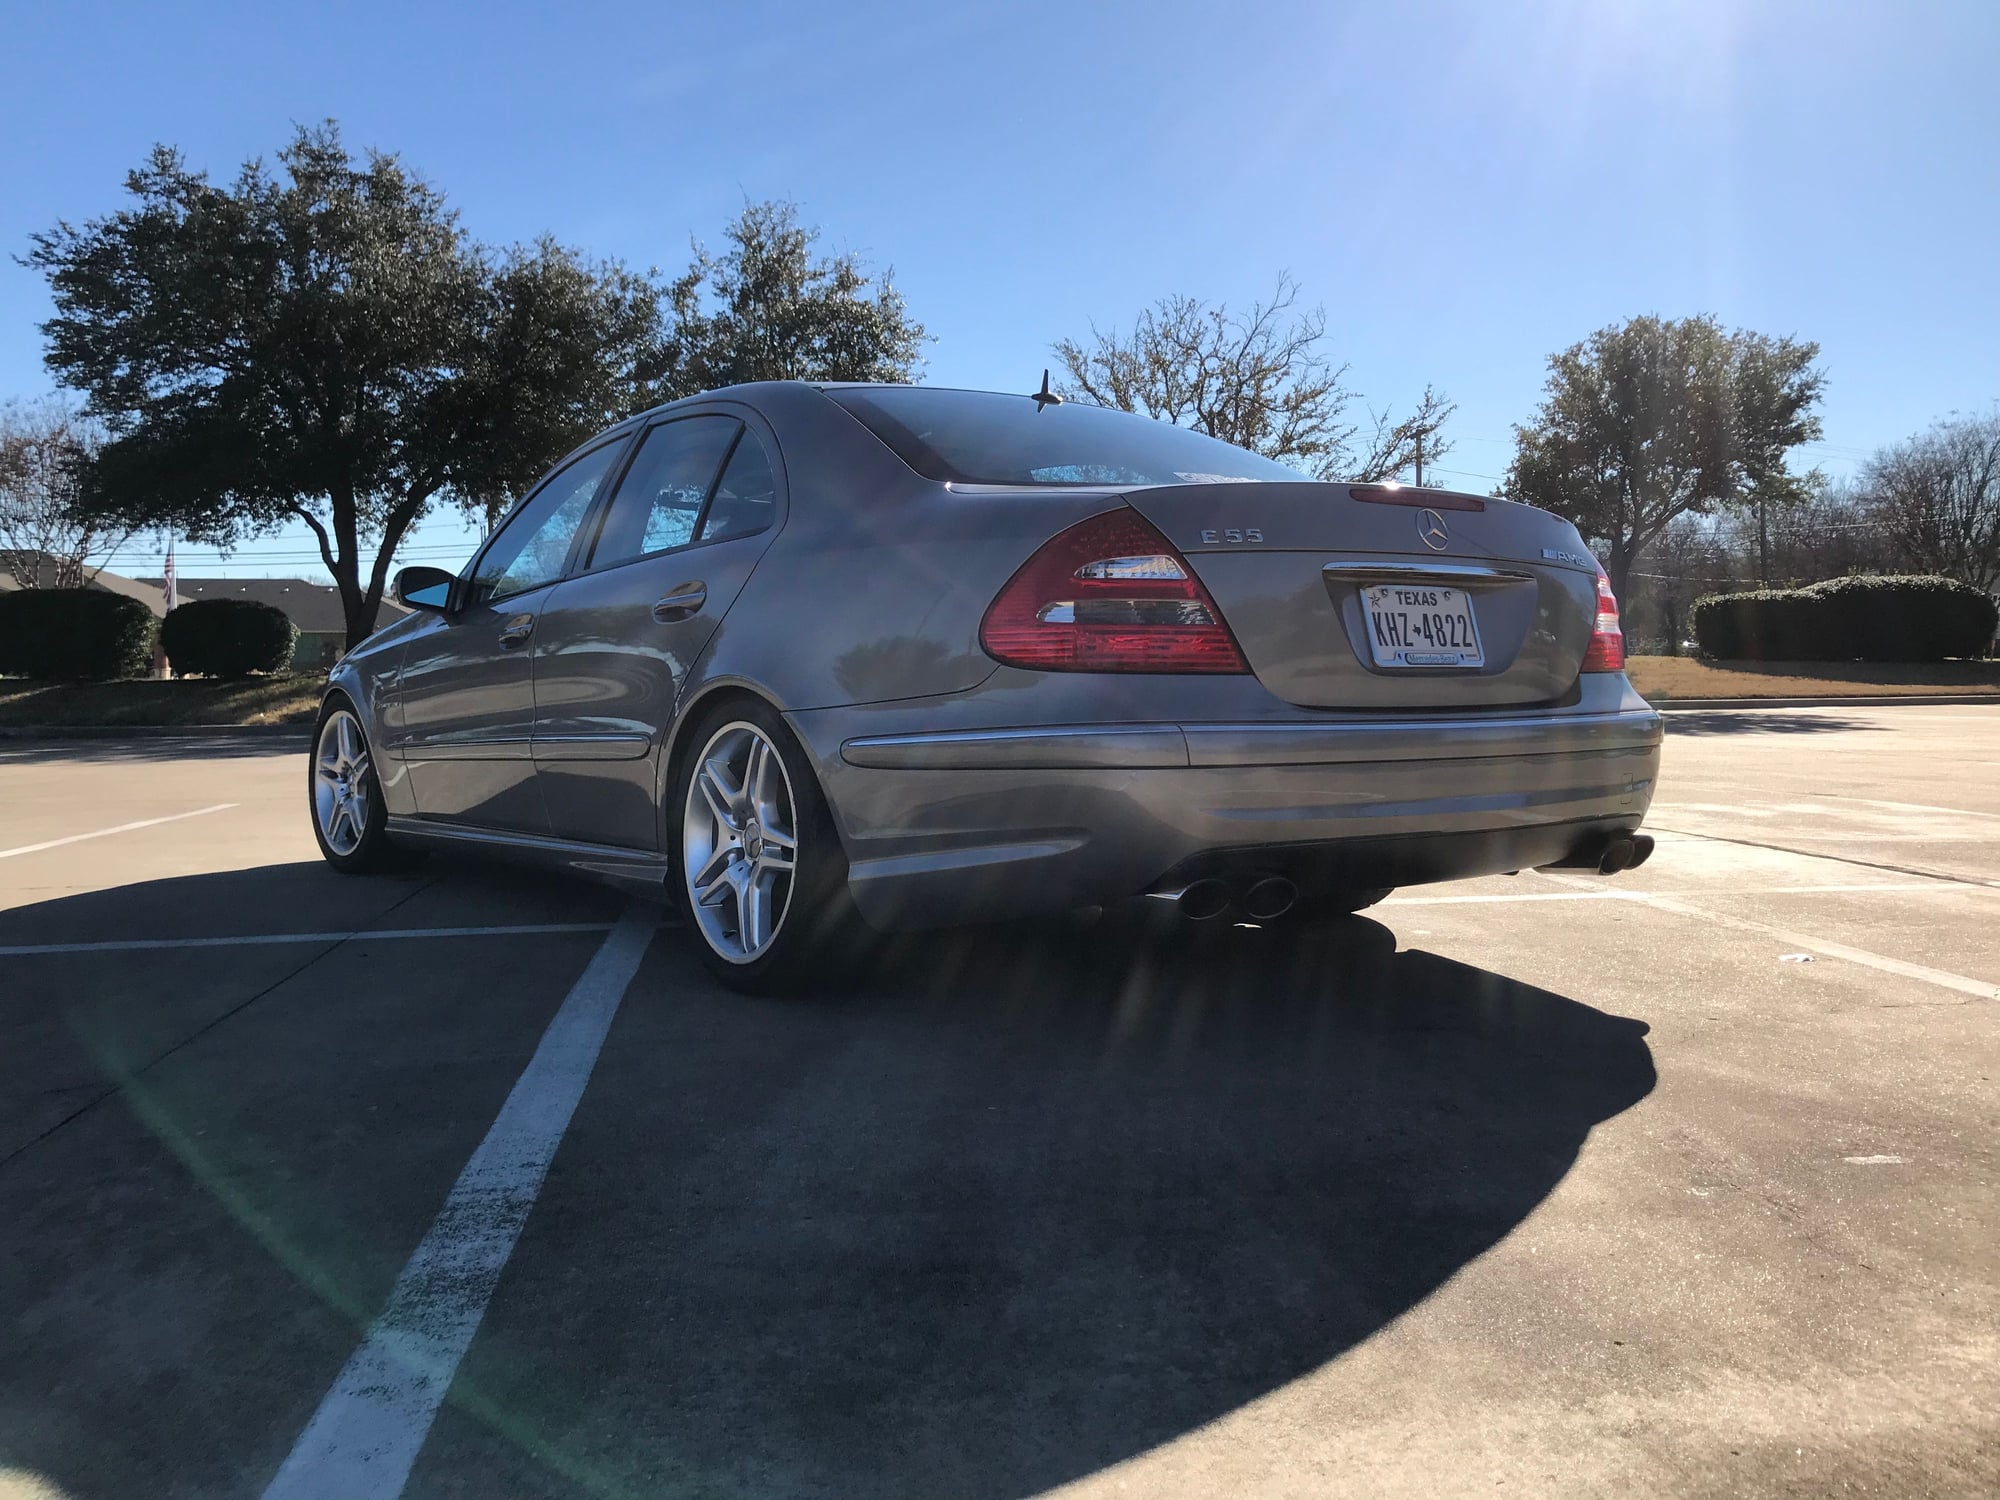 2003 Mercedes-Benz E55 AMG - 2003 E55 AMG *One of the cleanest on the market* - Used - VIN http://www.vinaud - 115,000 Miles - 8 cyl - Automatic - Sedan - Beige - Keller, TX 76248, United States